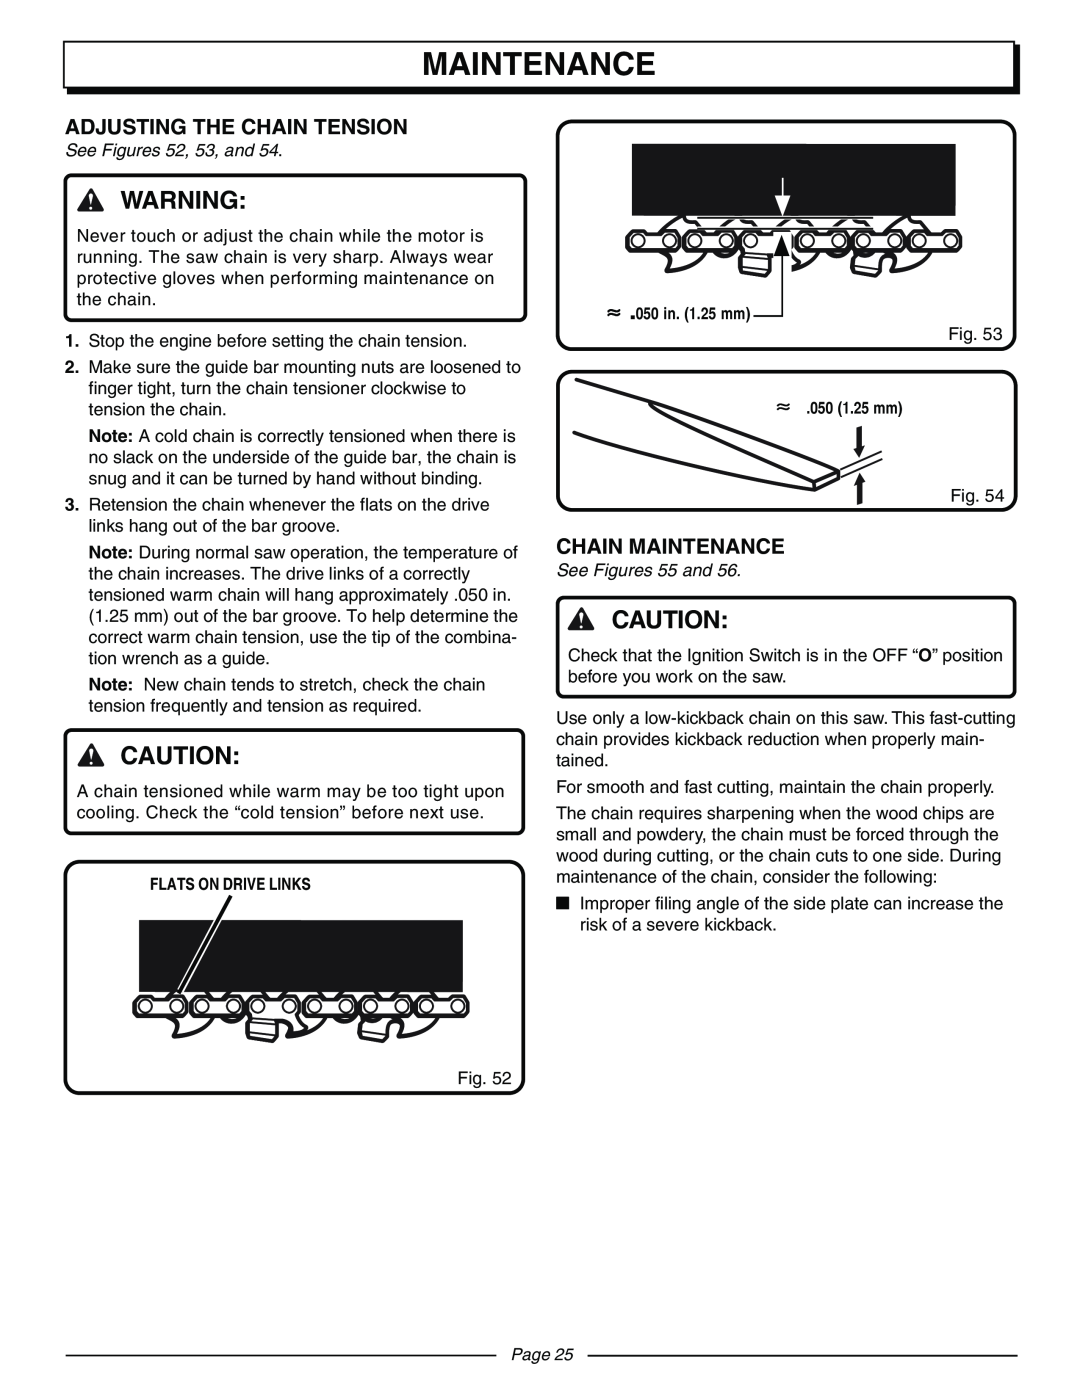 Homelite UT10570 manual Adjusting The Chain Tension, Chain Maintenance, See Figures 52, 53, and, See Figures 55 and, Page 